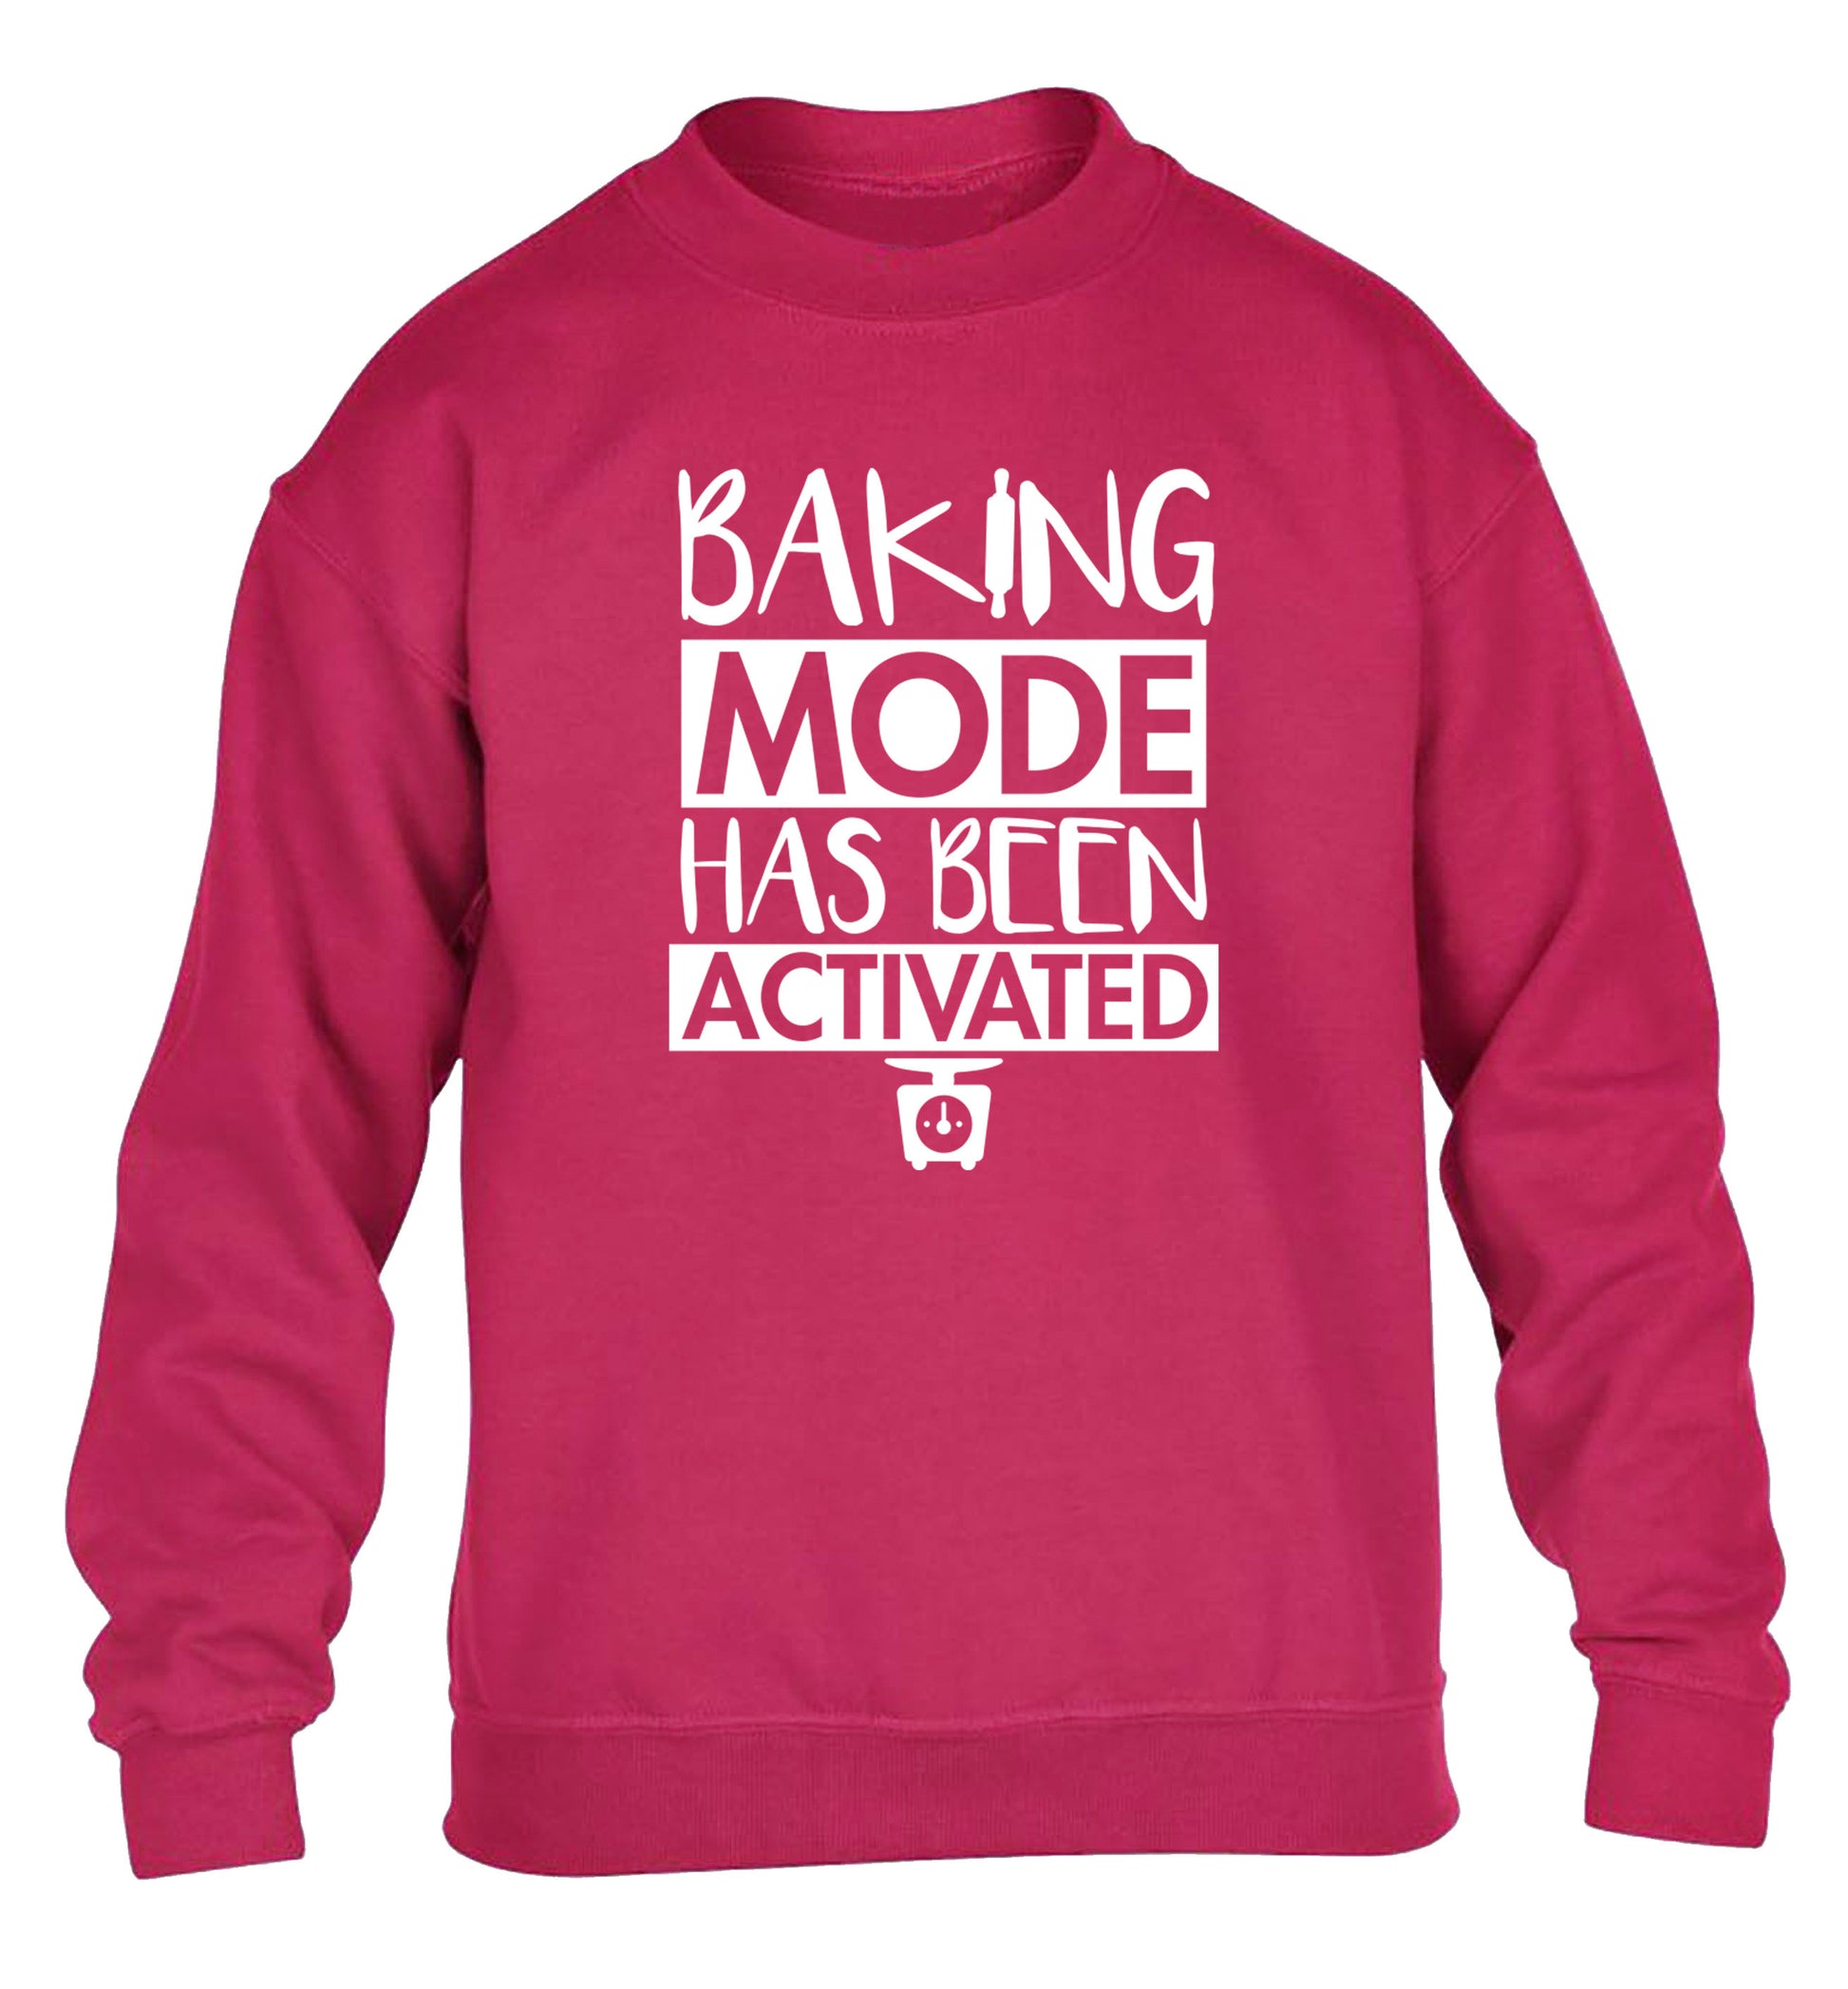 Baking mode has been activated children's pink sweater 12-14 Years